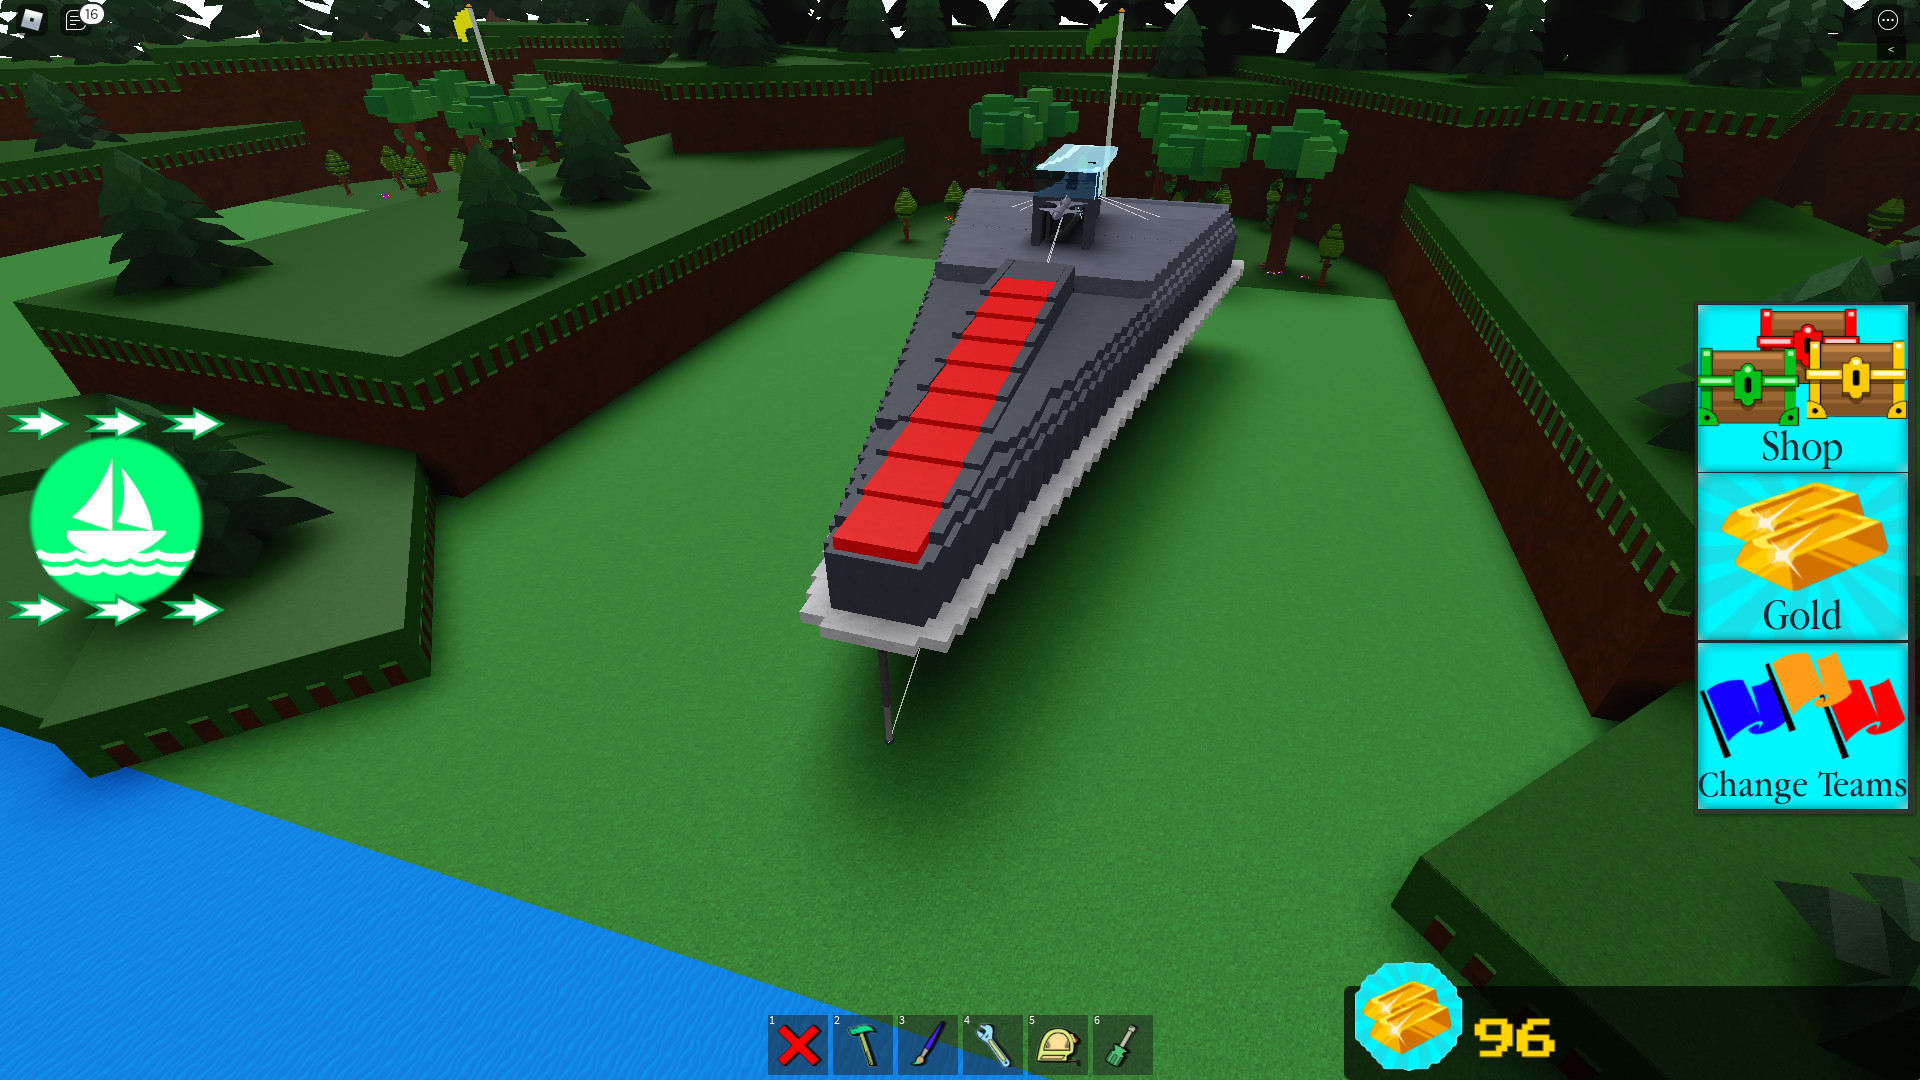 Make A Plane For You In Build A Boat For Treasure By Builderbloxboi Fiverr - roblox build a boat how to make a plane